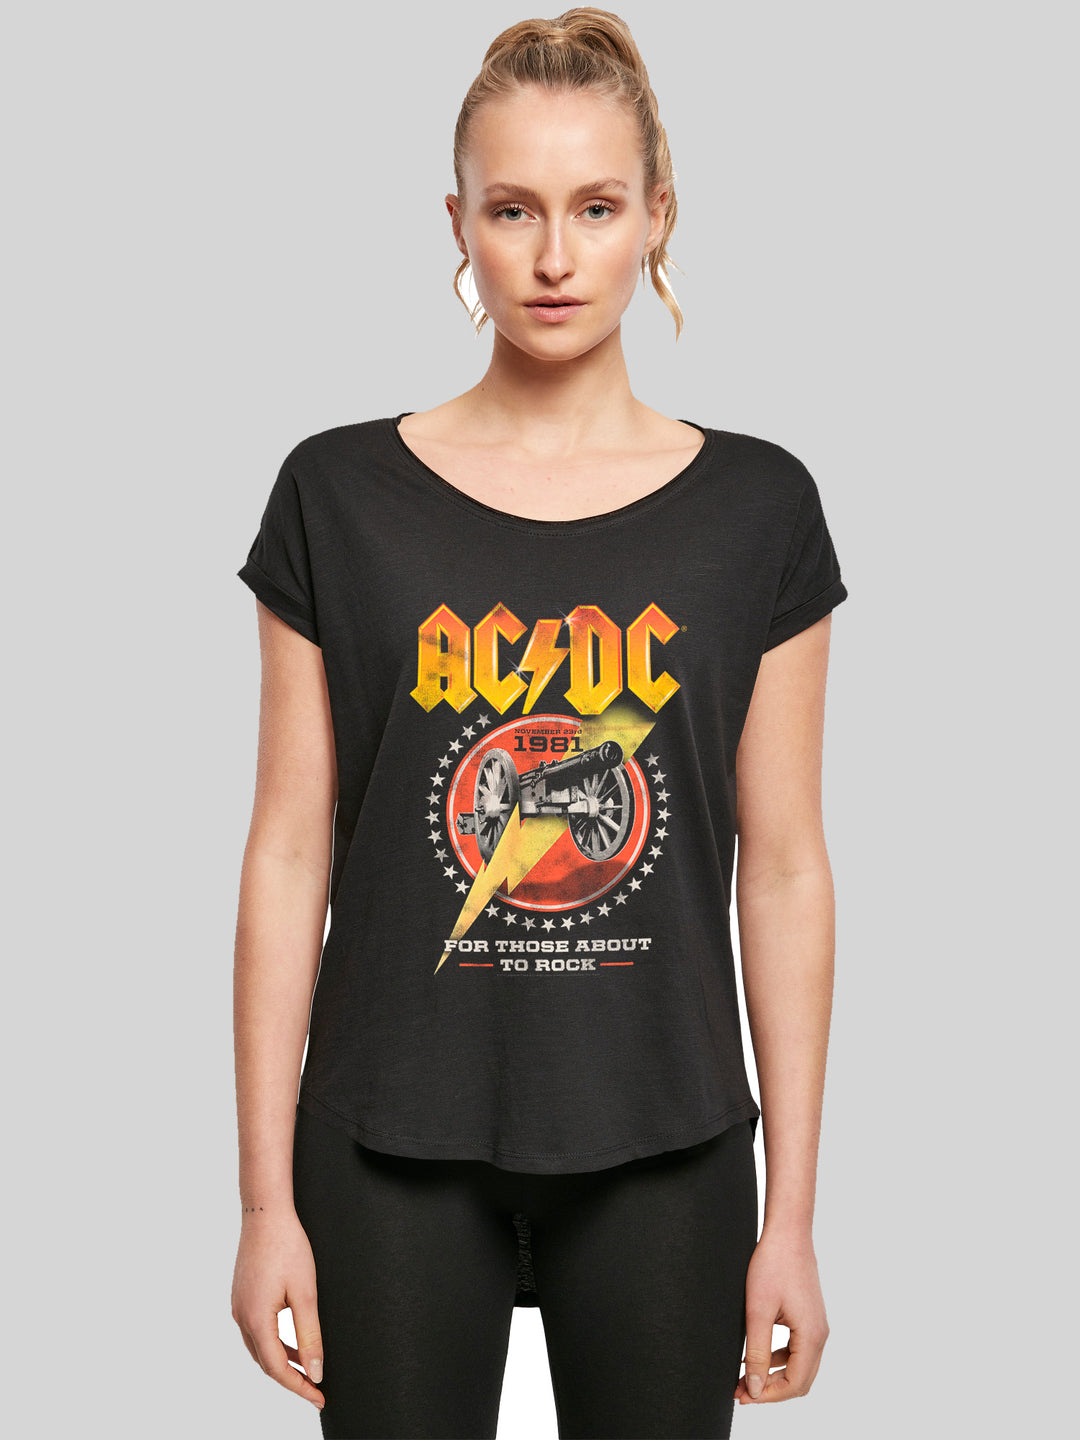 ACDC T-Shirt | For Those About To Rock 1981 | Premium Long Damen T Shirt